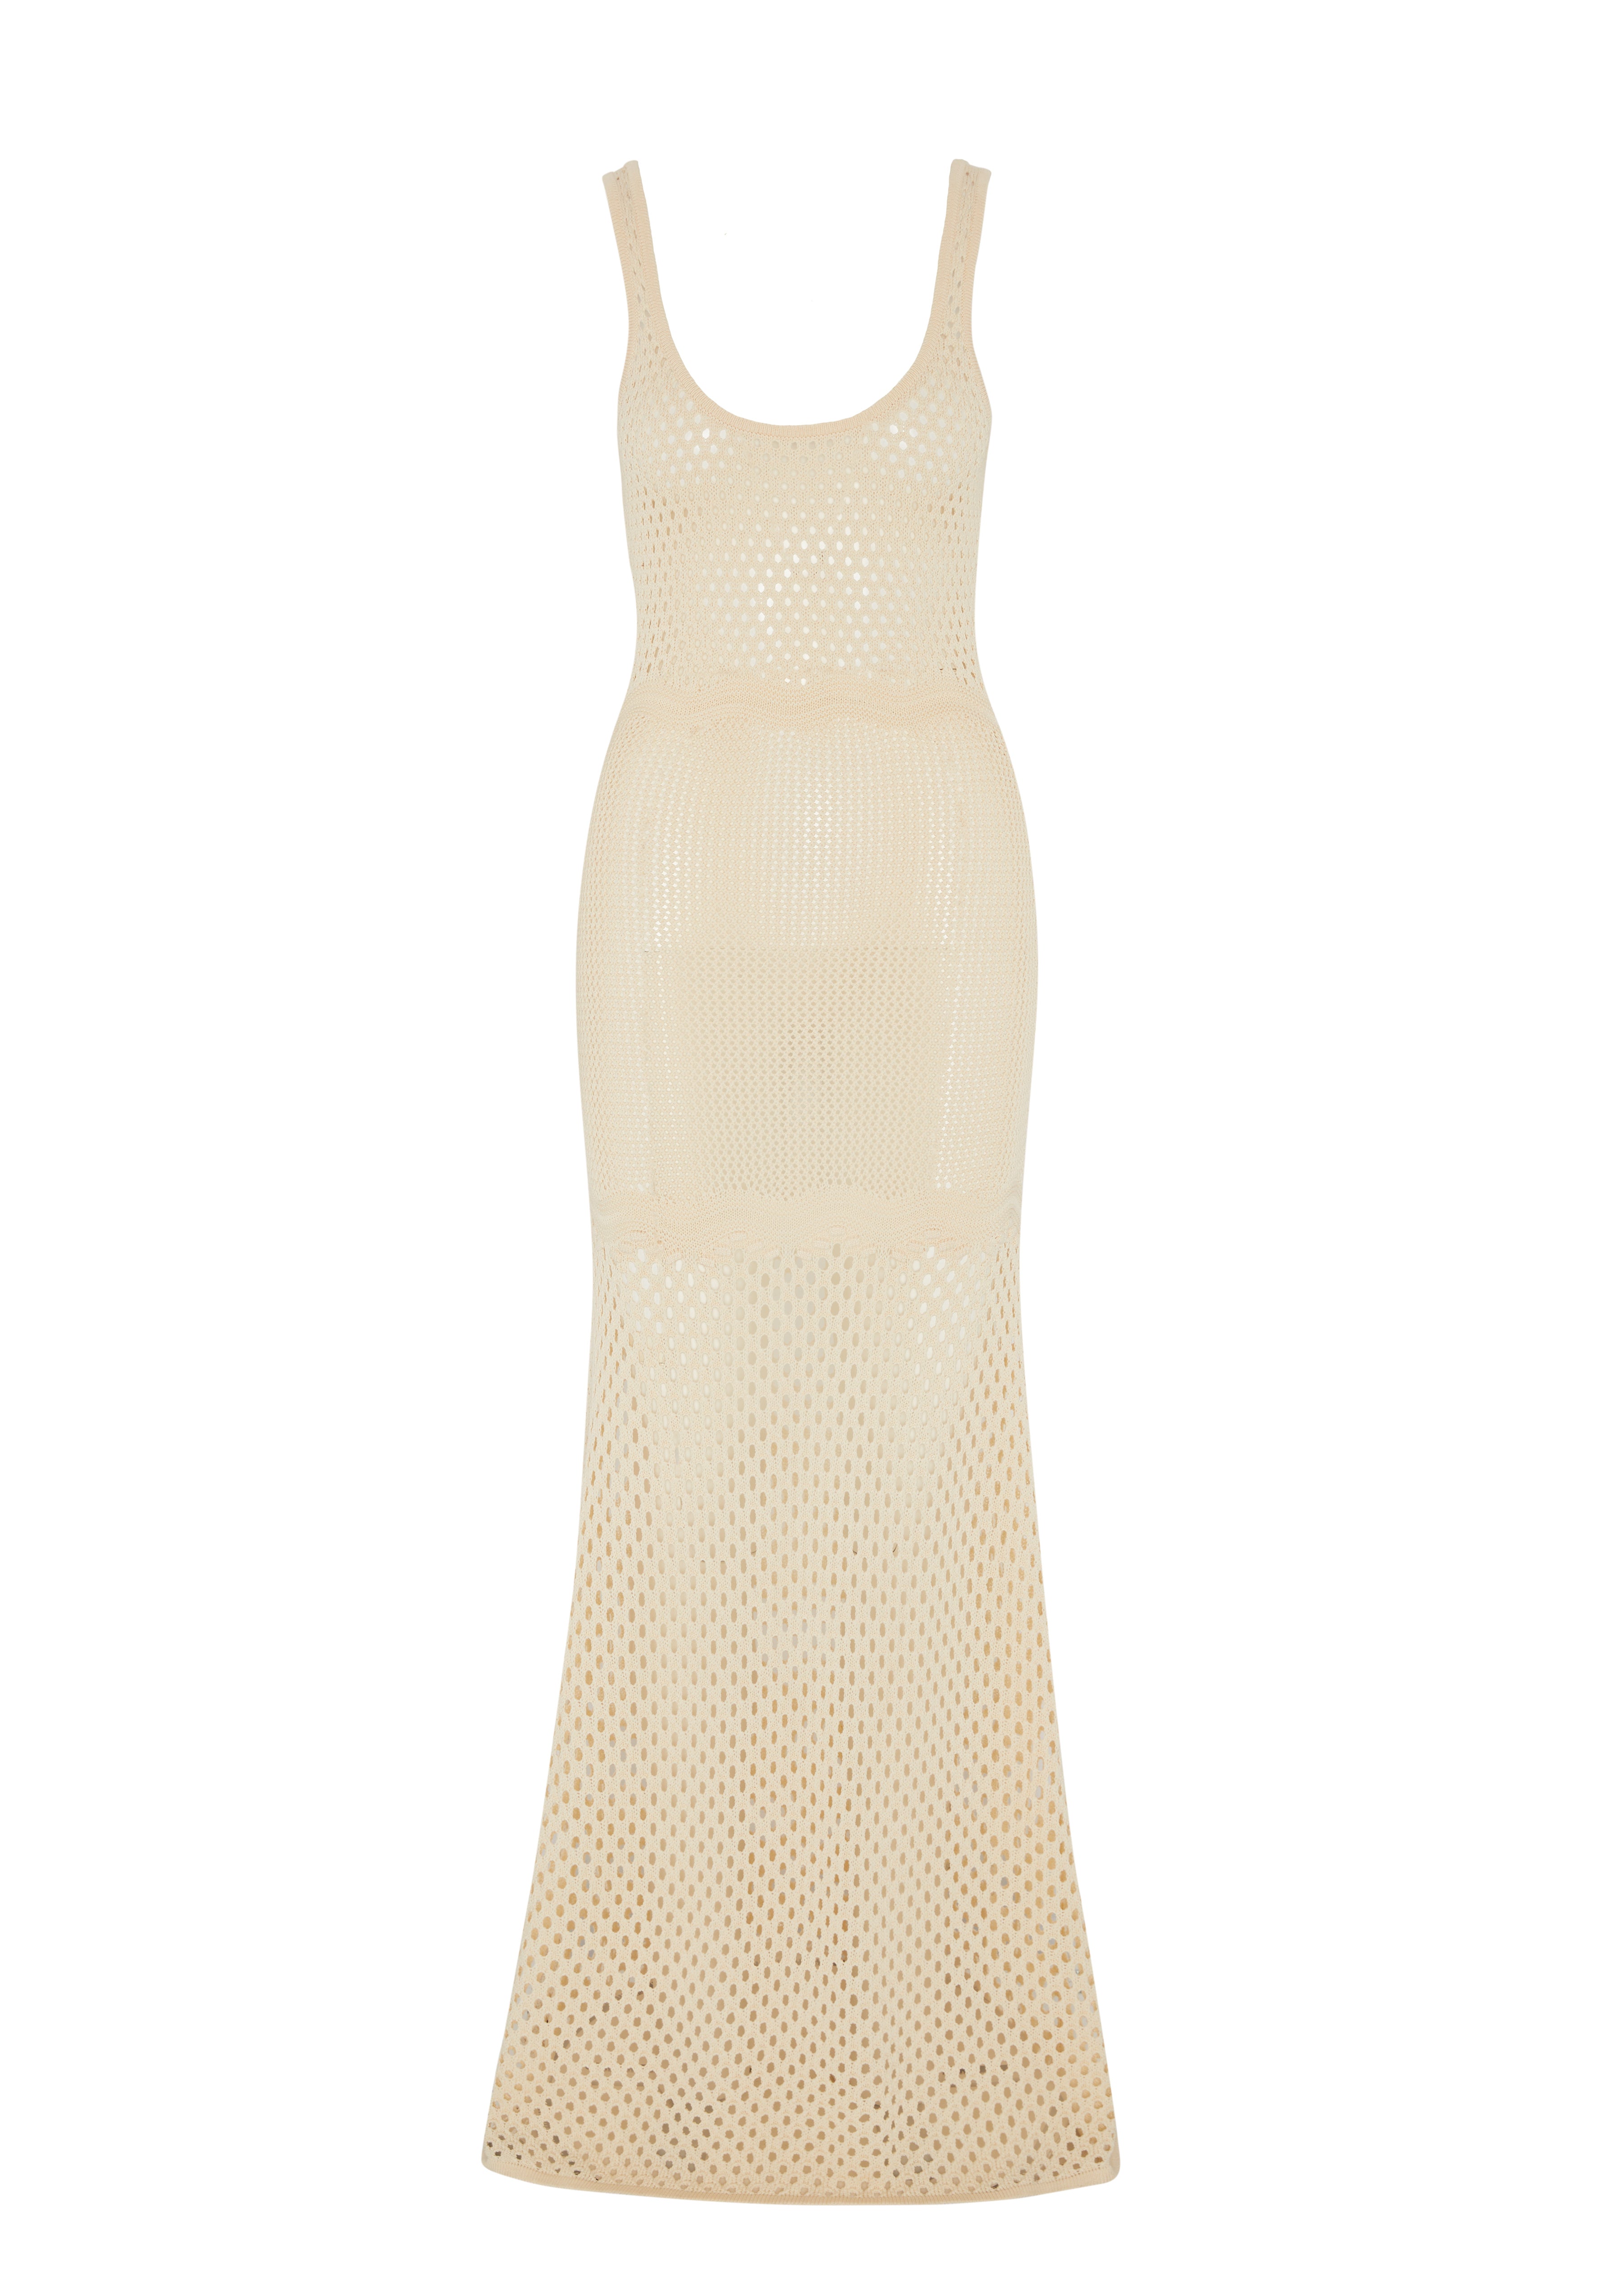 EVARAE ALEXIS KNITTED DRESS IN SOFT CREME